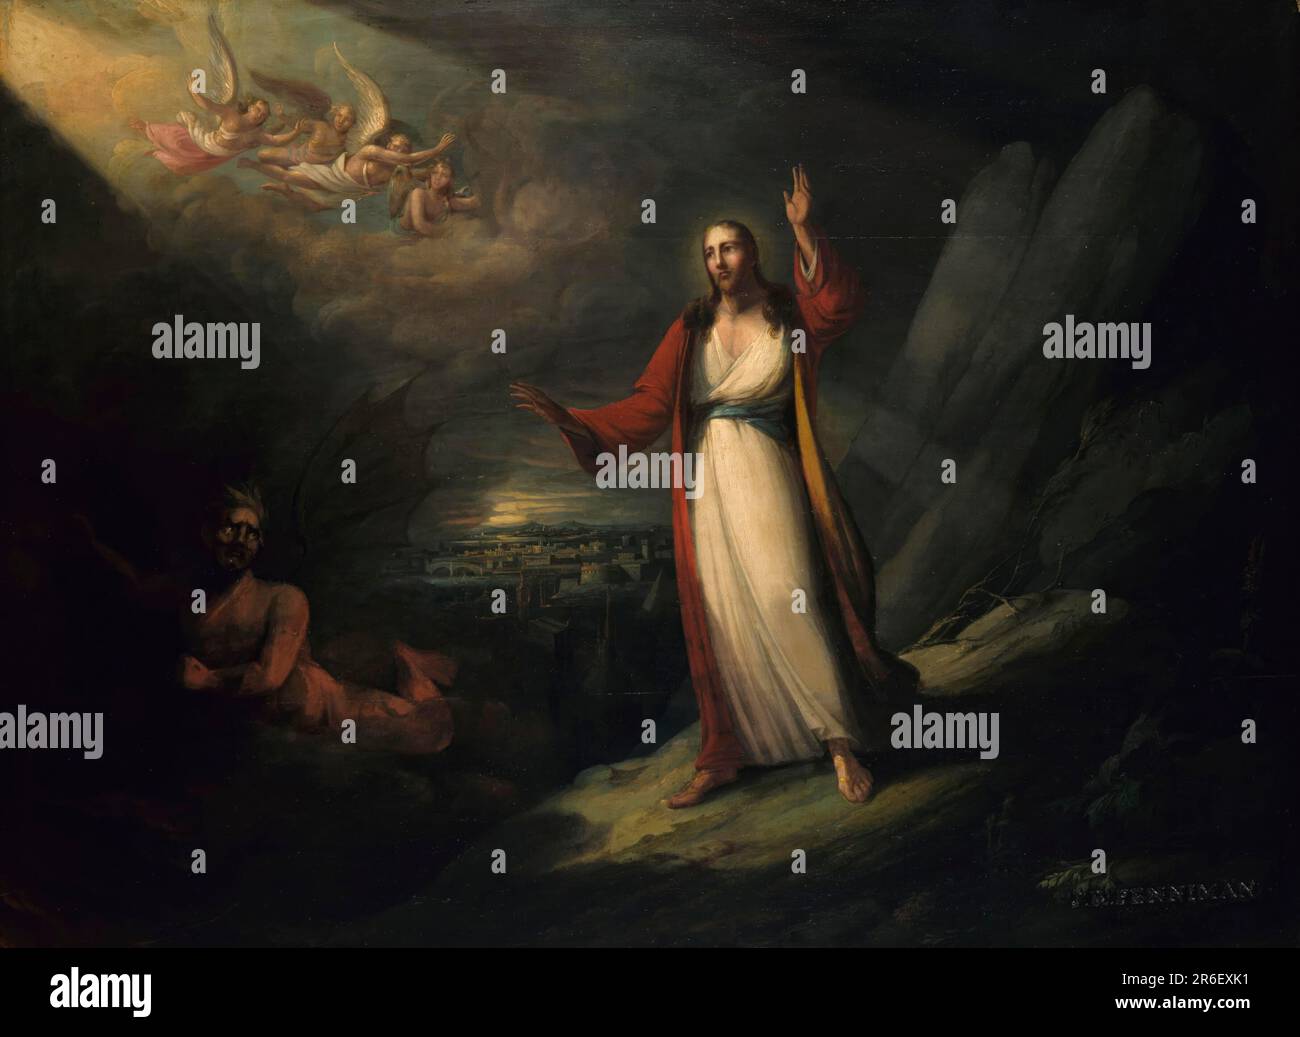 Christ Tempted by the Devil. Date: 1818. oil on wood. Museum: Smithsonian American Art Museum. Stock Photo